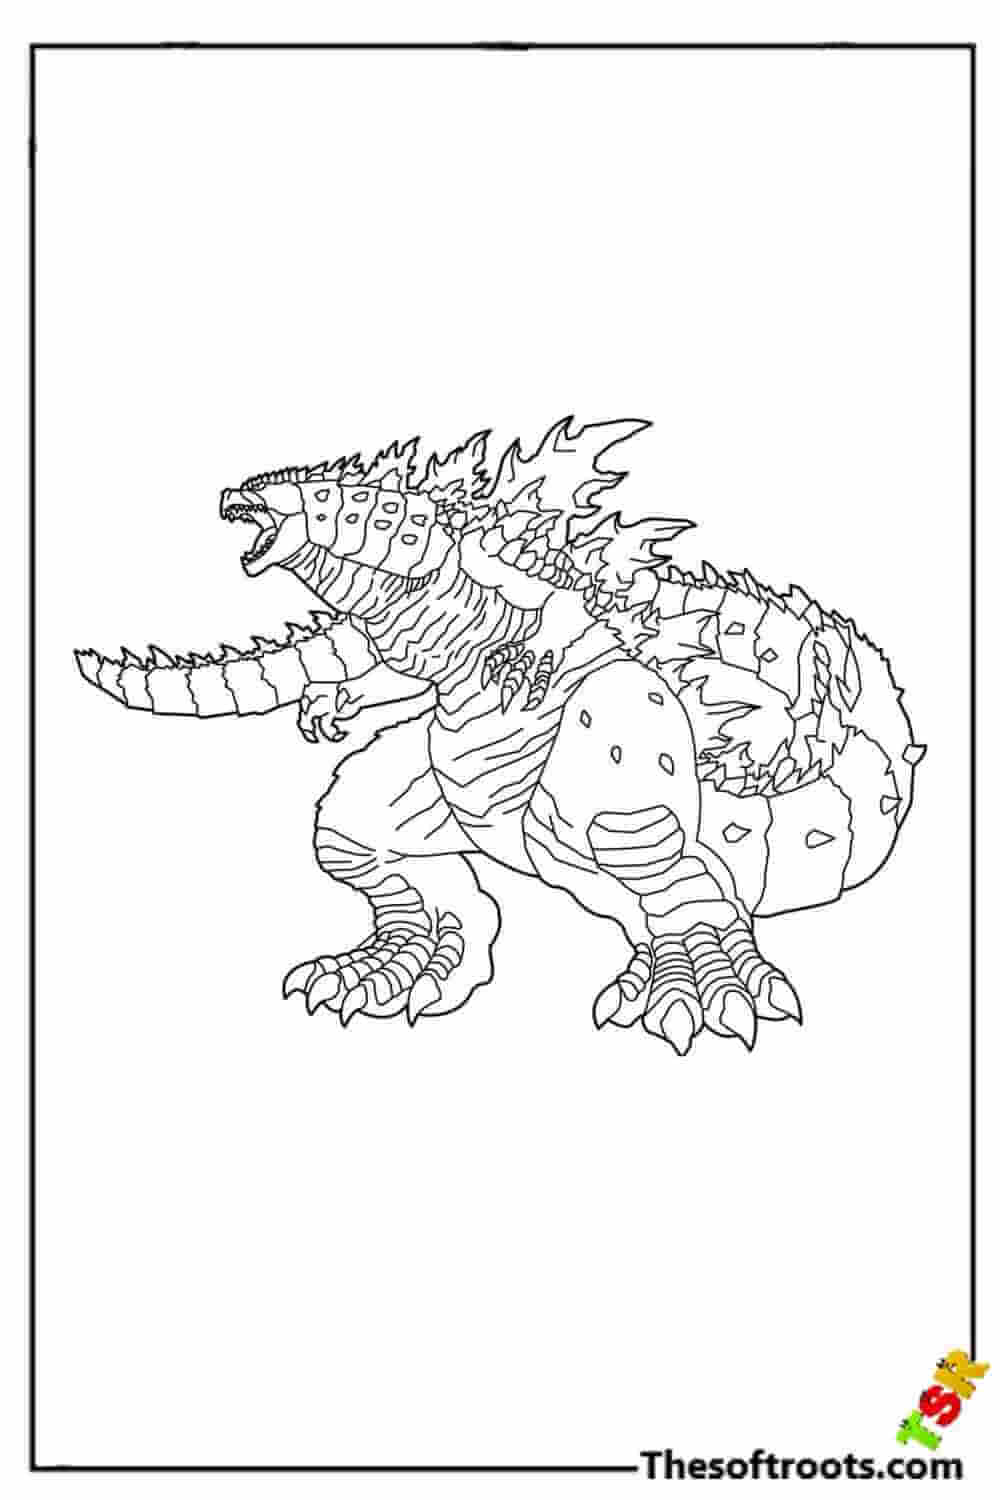 The Godzilla coloring pages